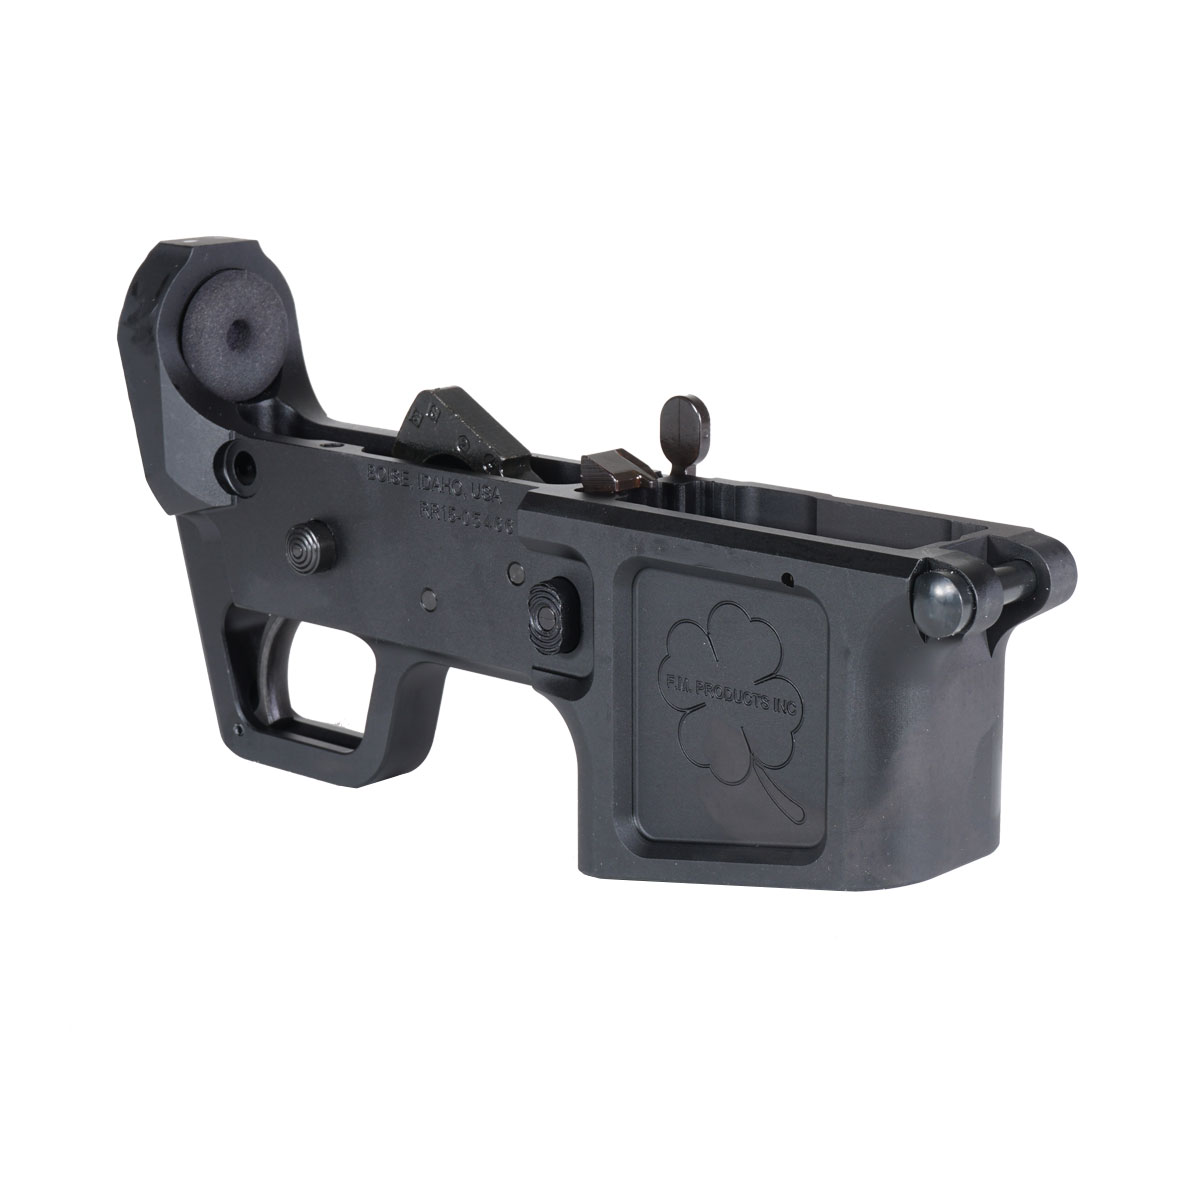 Foxtrot Mike Ranch Rifle Complete Lower - Multi-Caliber - Accepts AR15 Magazines